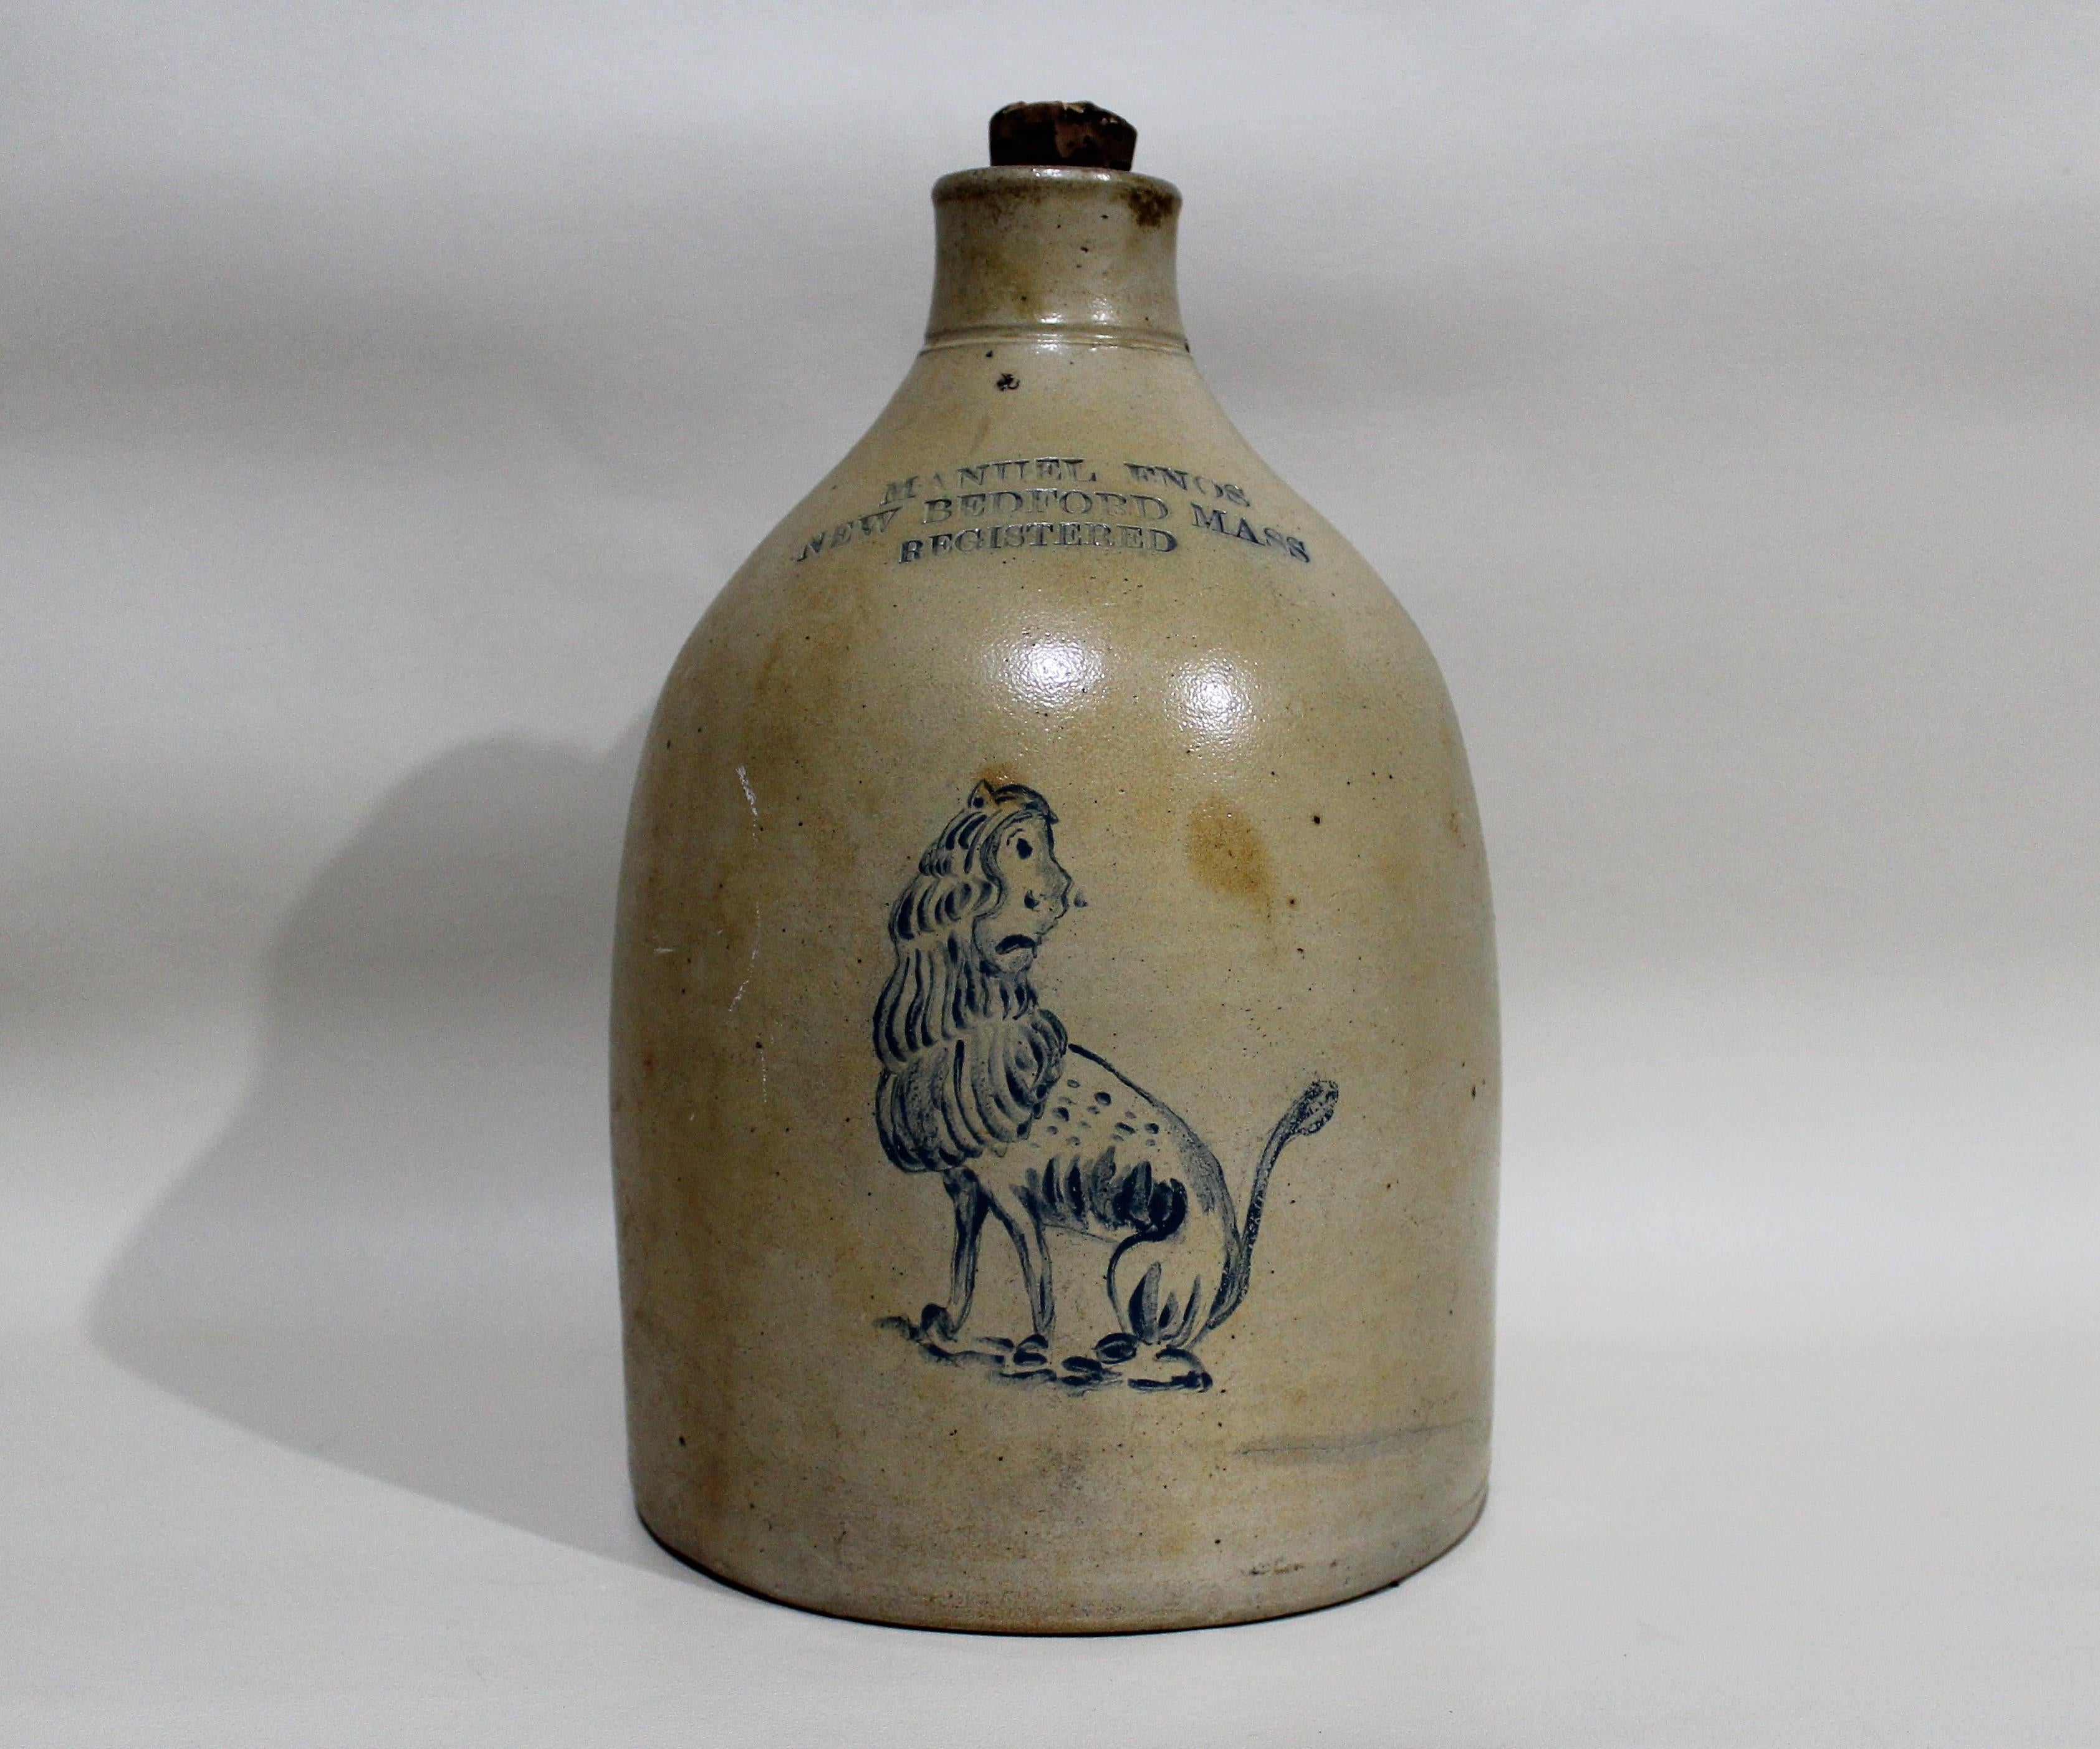 Manuel Enos of New Bedford Massachusetts stoneware whisky jug with painted lion. Captain Manuel Enos (1827-1915), known as Big Manuel, was born on the Azores Islands. He rose through the ranks as he sailed on Cold Spring Harbor’s Huntsville and